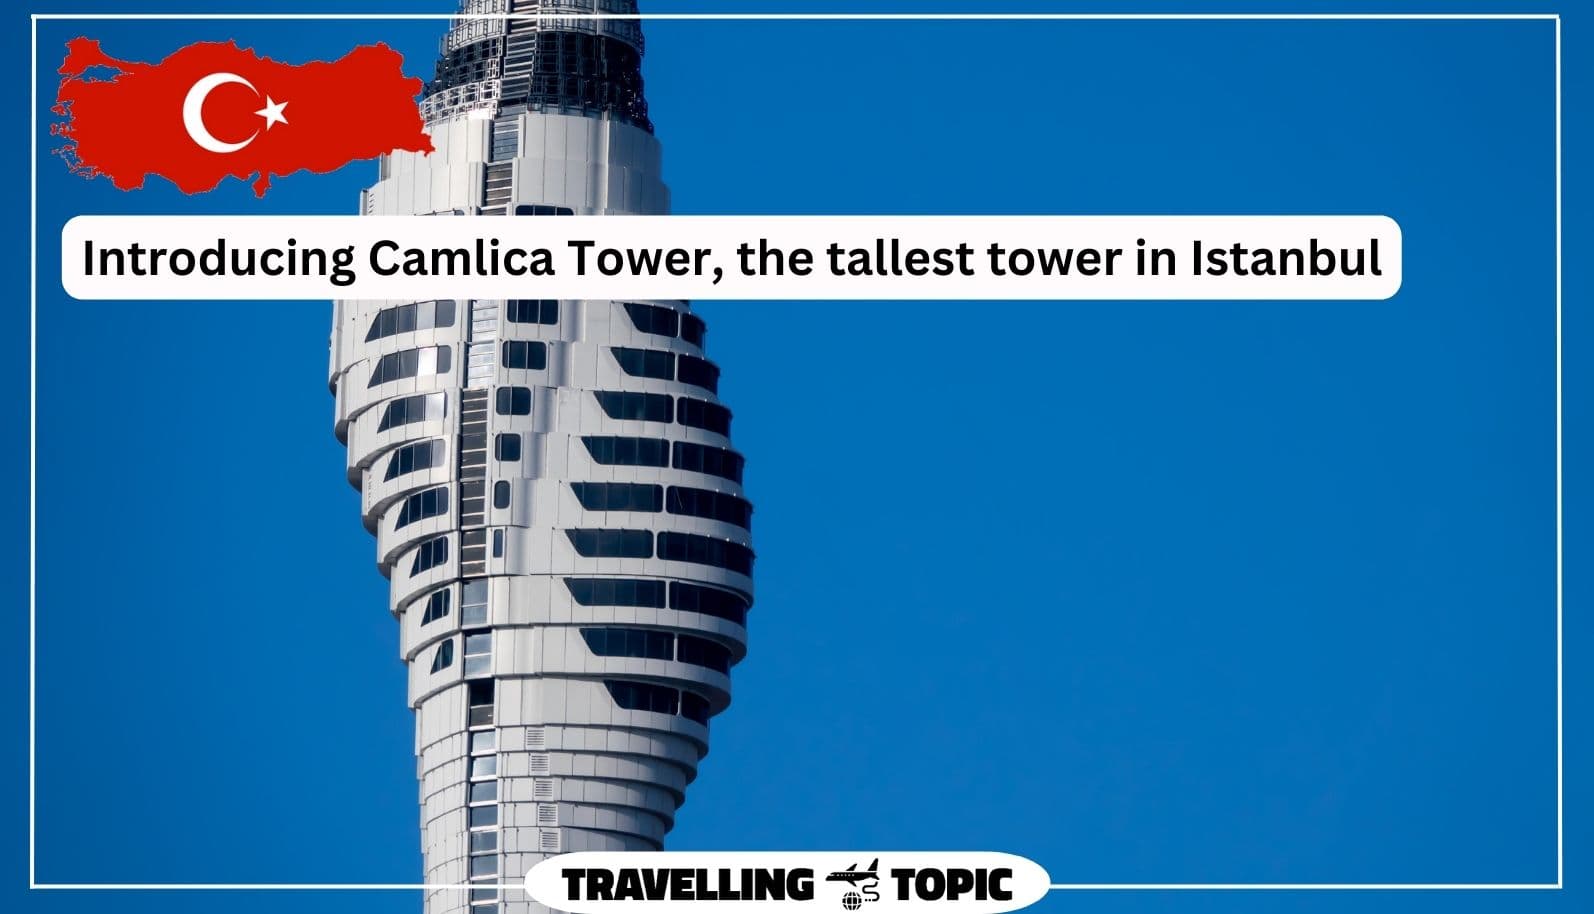 Introducing Camlica Tower, the tallest tower in Istanbul